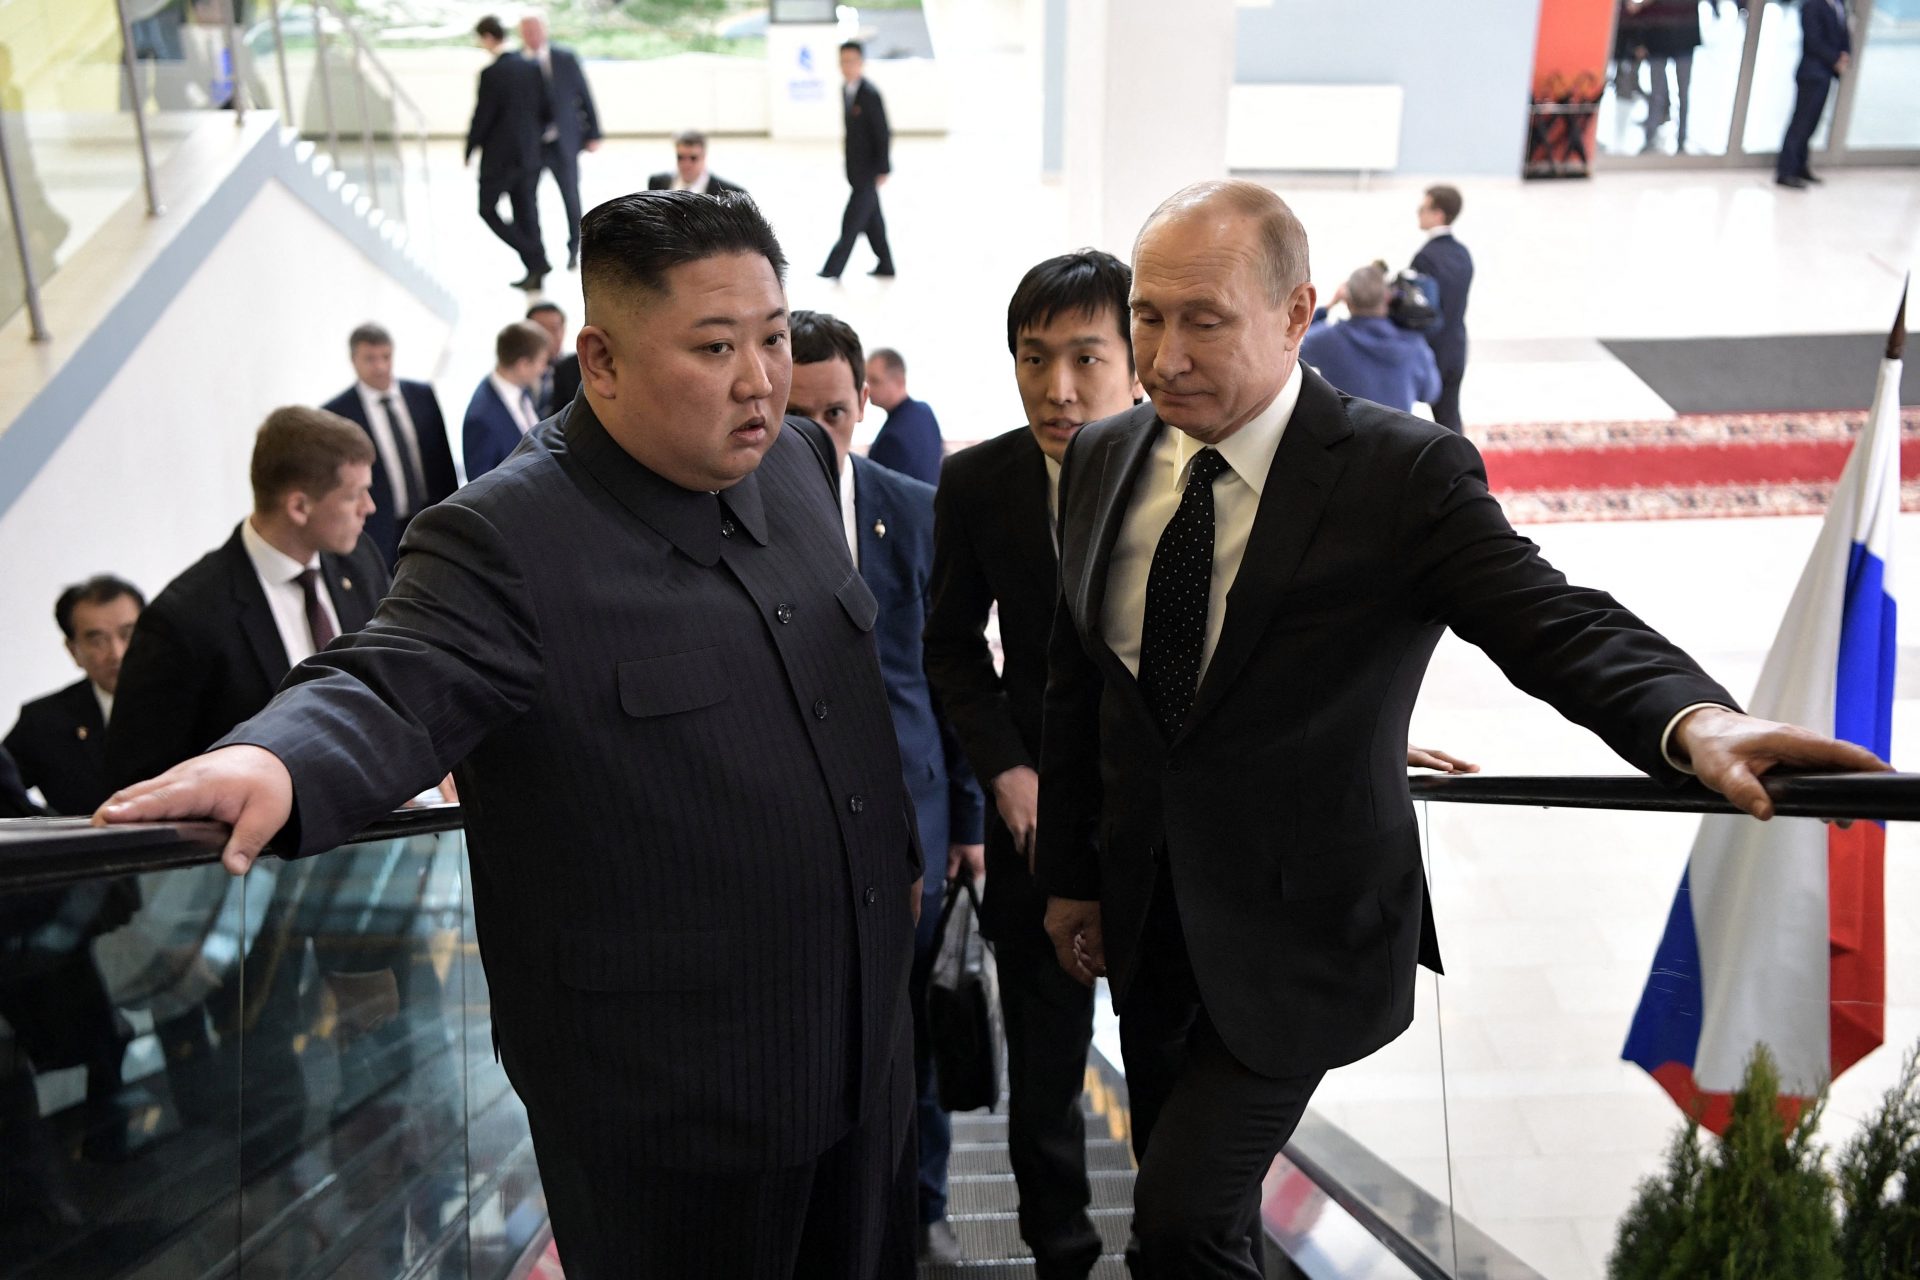 <p>During this meeting, the two leaders are expected to discuss the possibility of North Korea providing military support to Russia for the war in Ukraine, particularly concerning the supply of weaponry. The specific location for these talks remains undisclosed.</p>